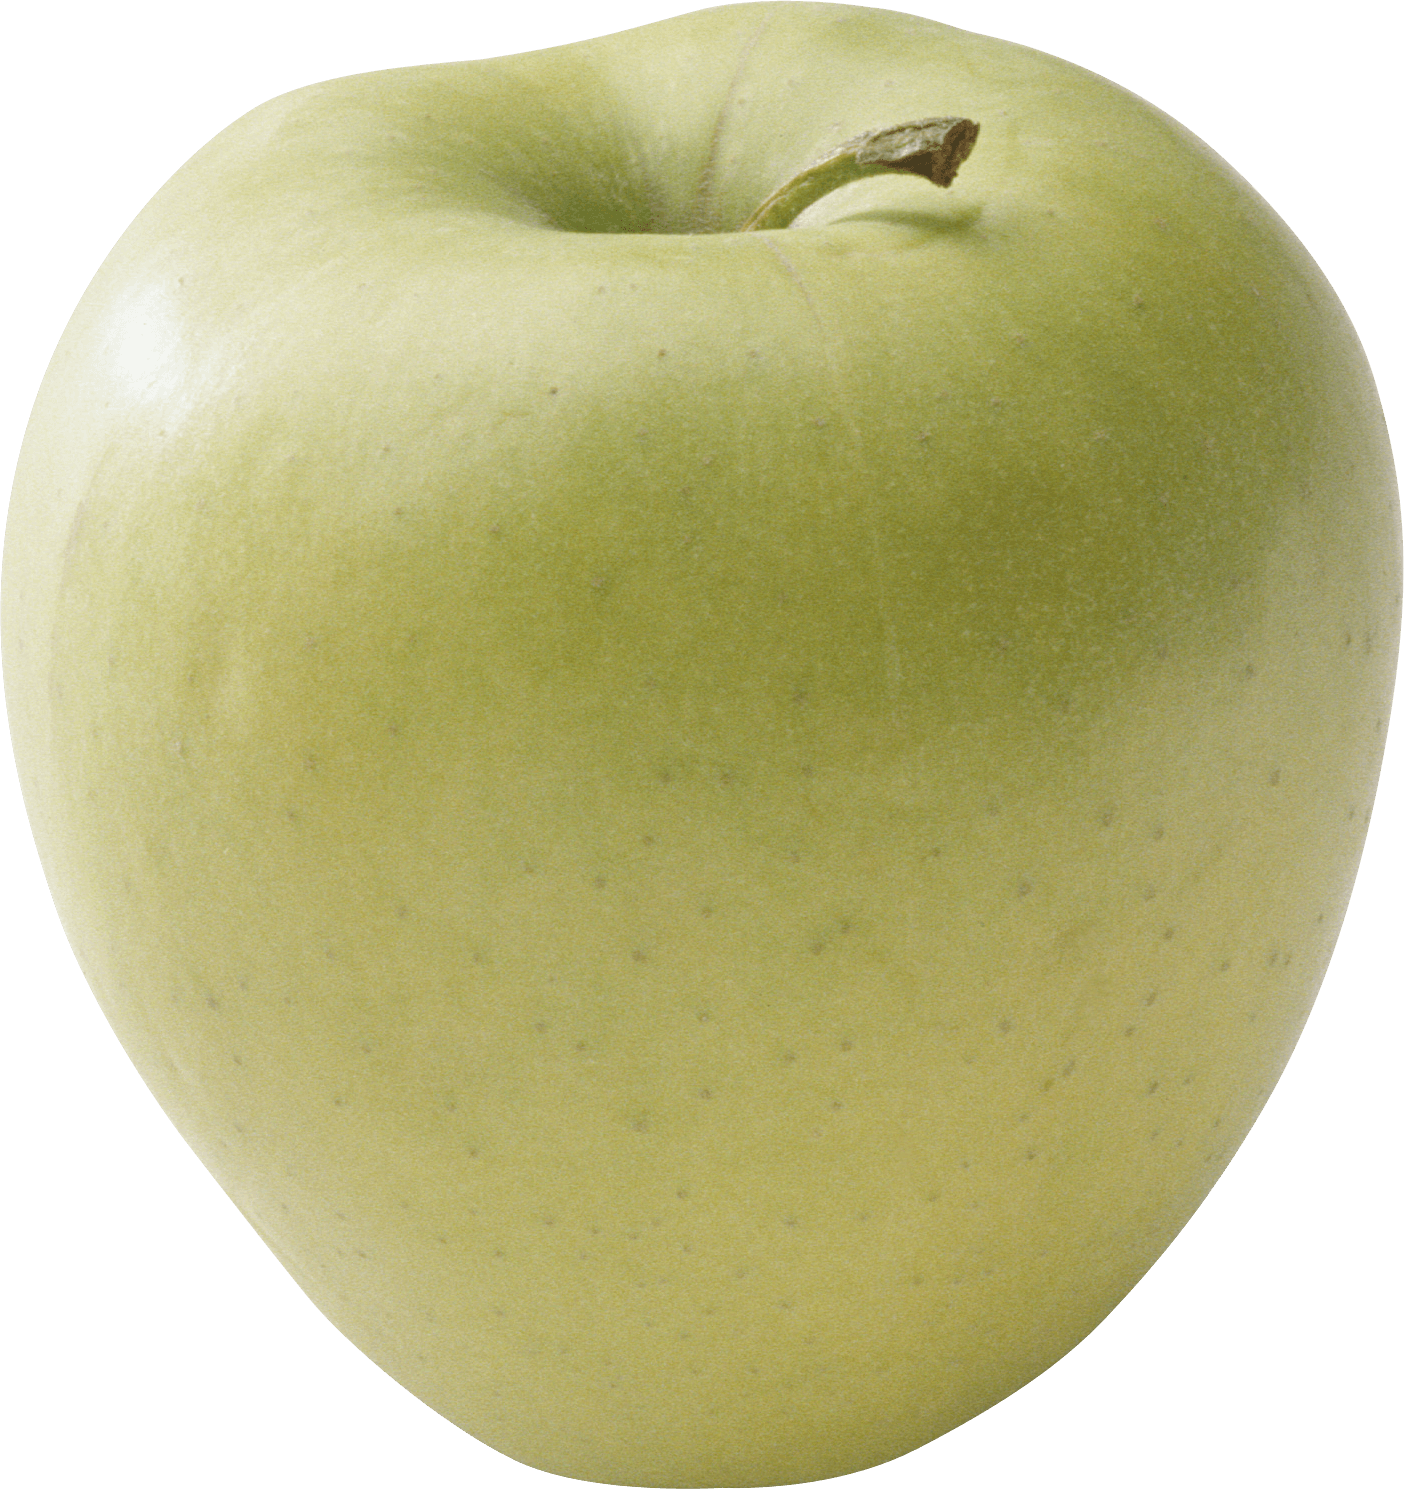 78 green apple png image